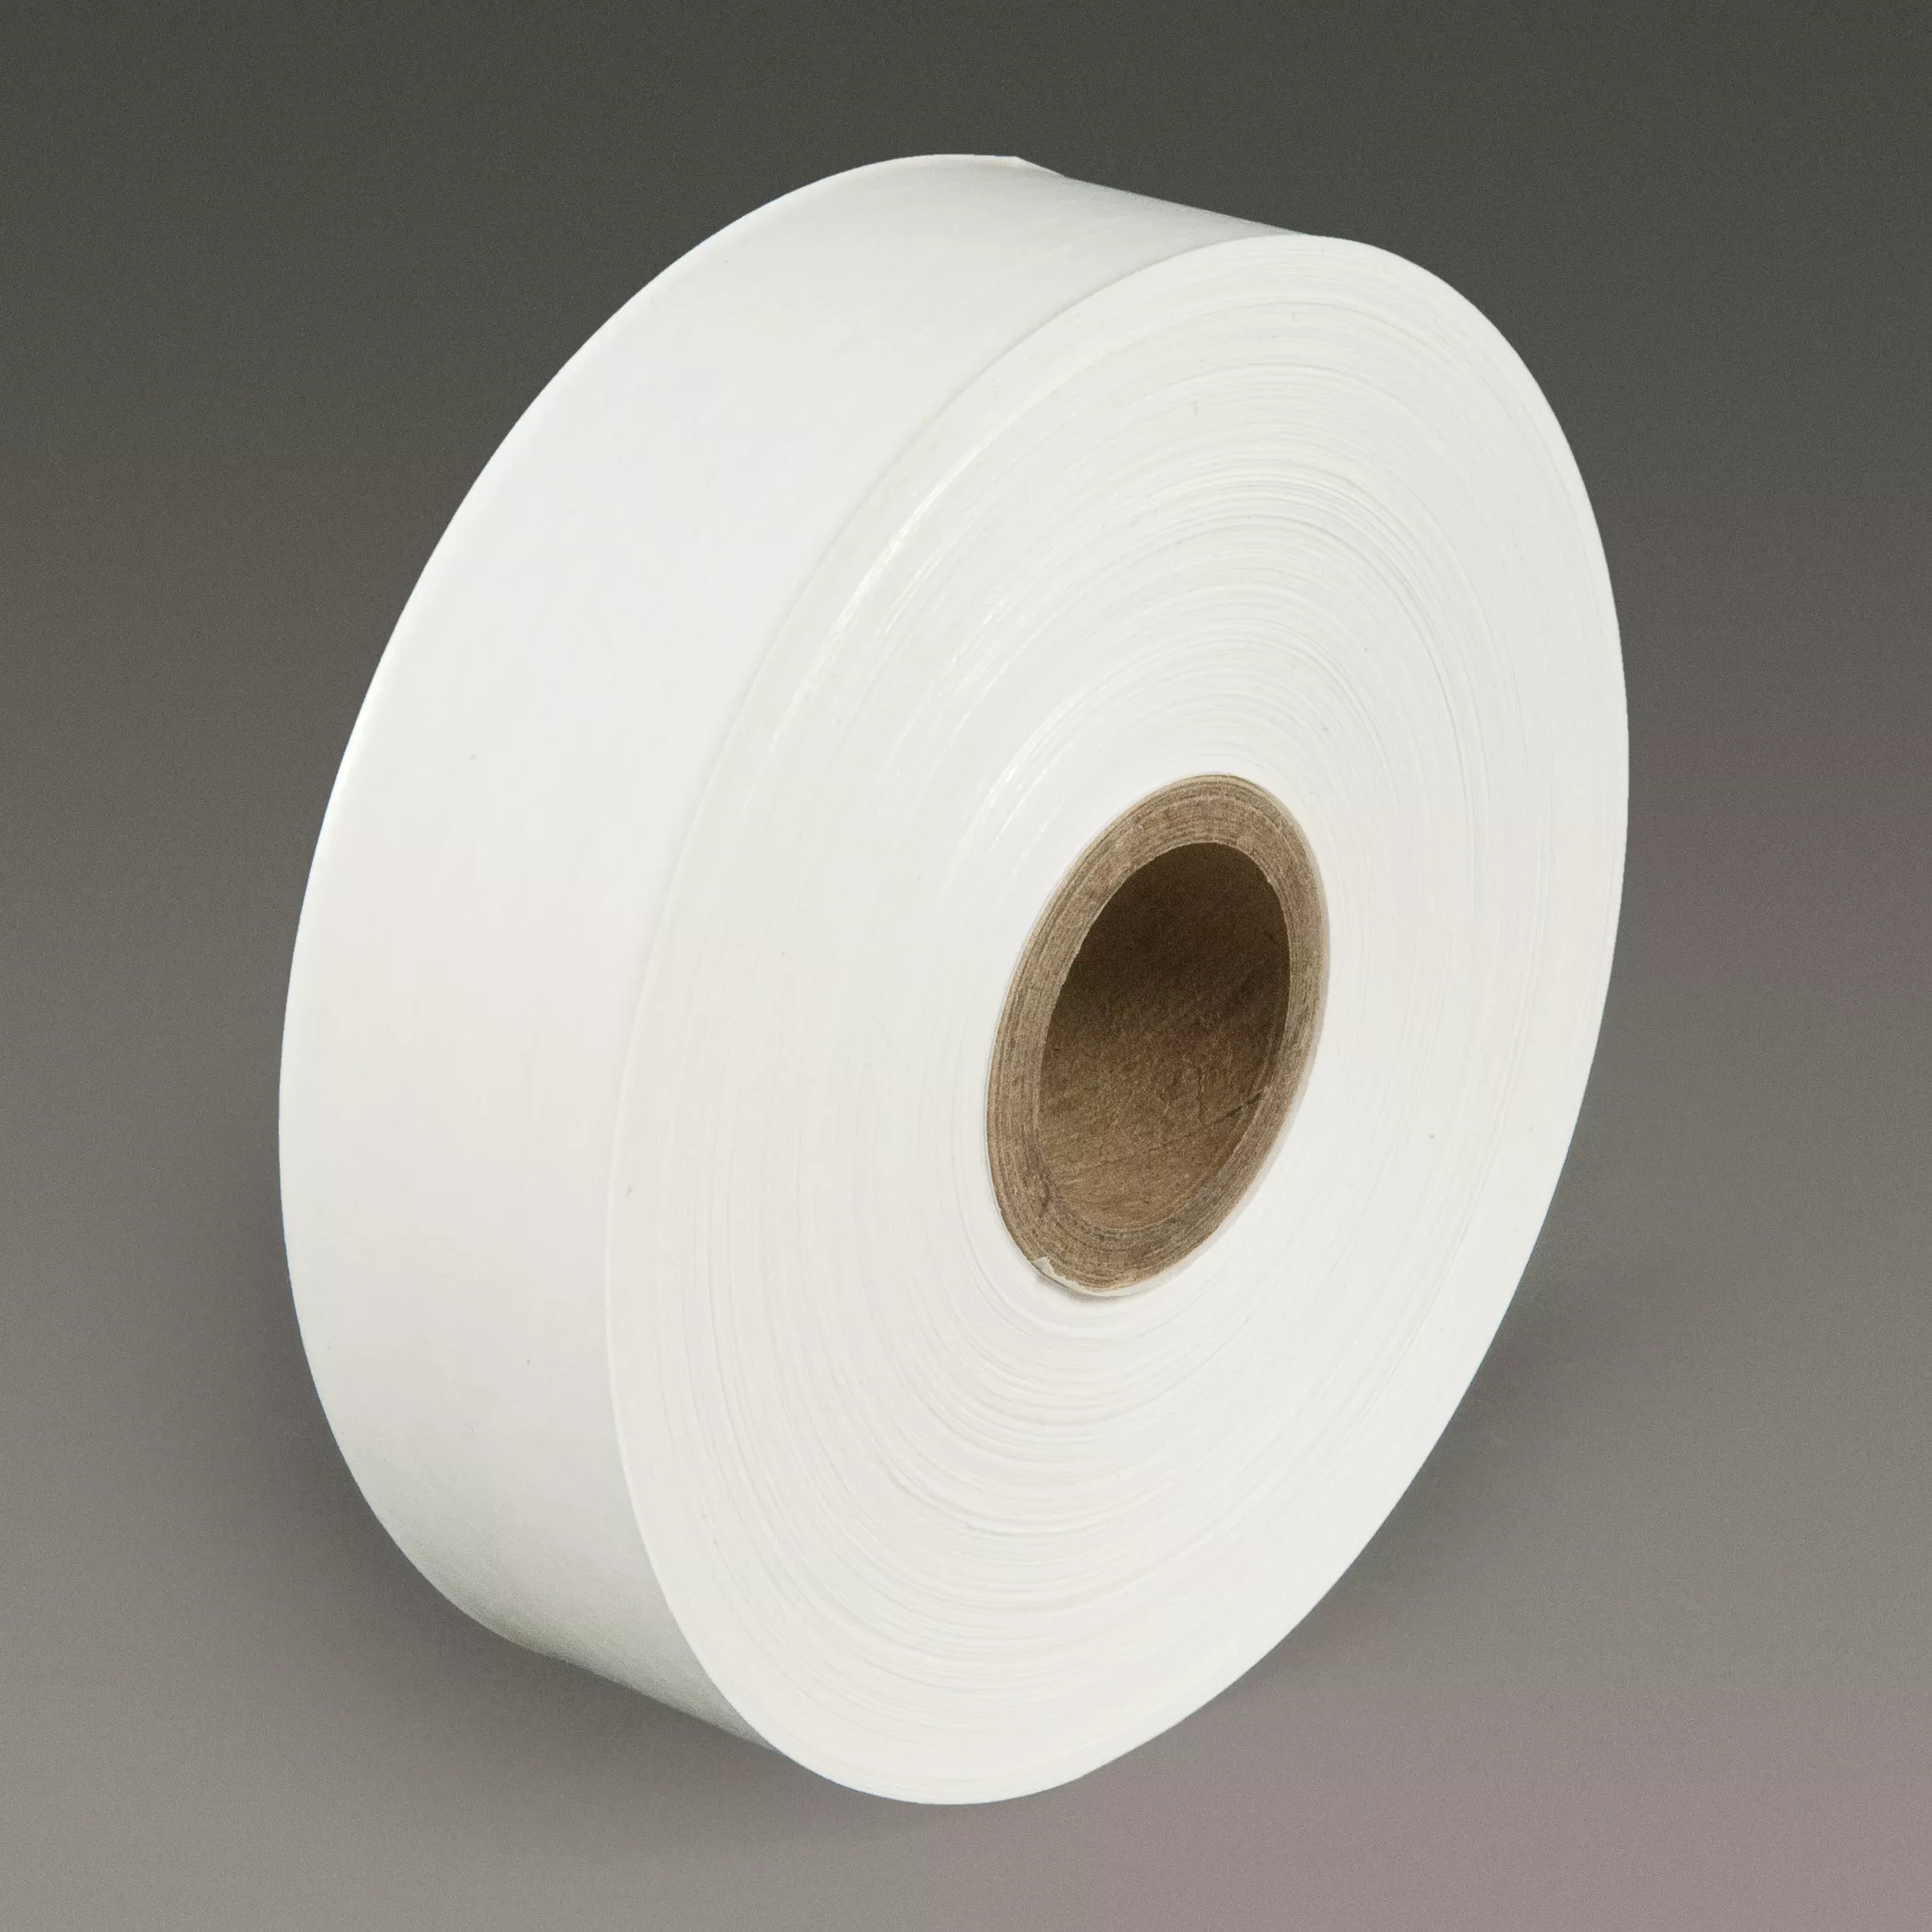 3M™ Water Activated Paper Tape 6141, White, Light Duty, 1-1/2 in x 500 ft, 20/Case